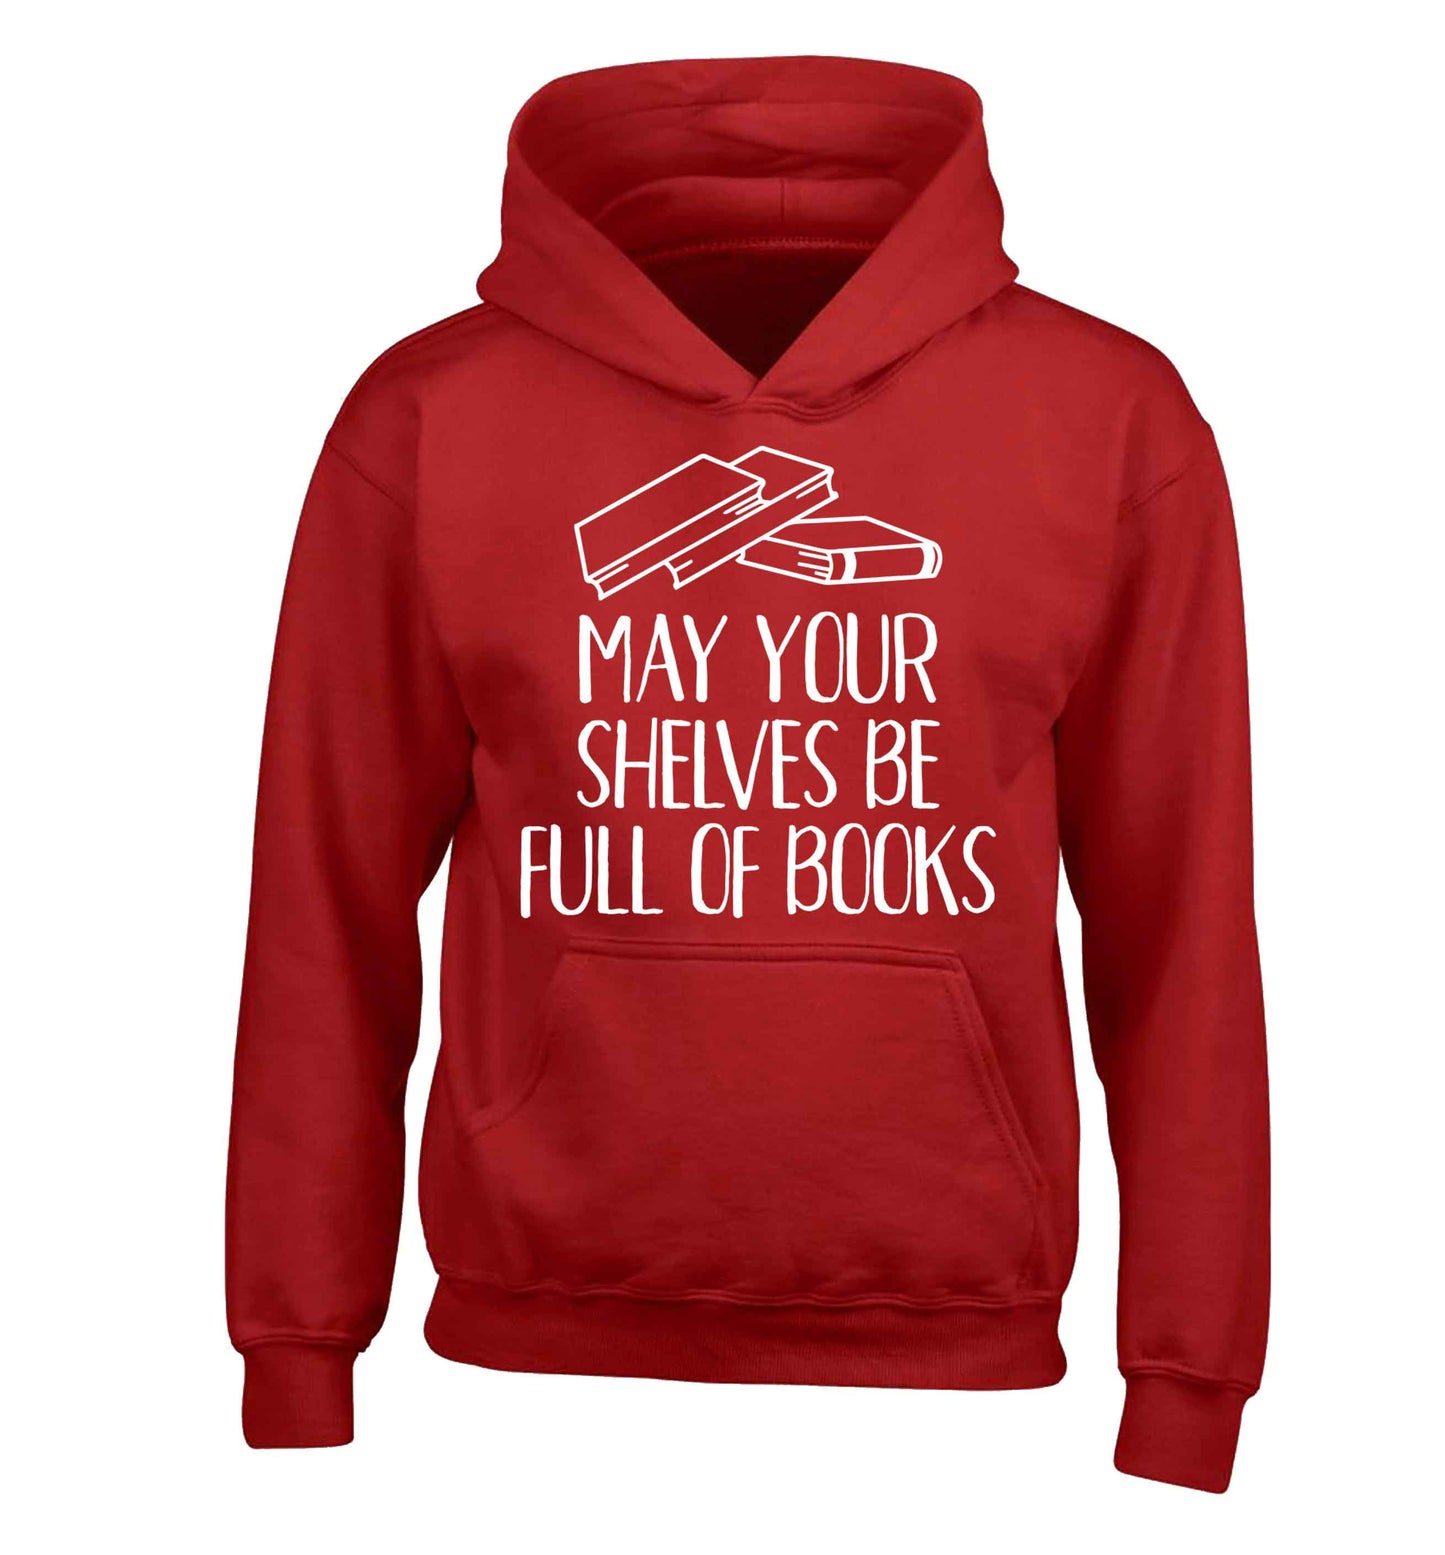 May your shelves be full of books children's red hoodie 12-13 Years